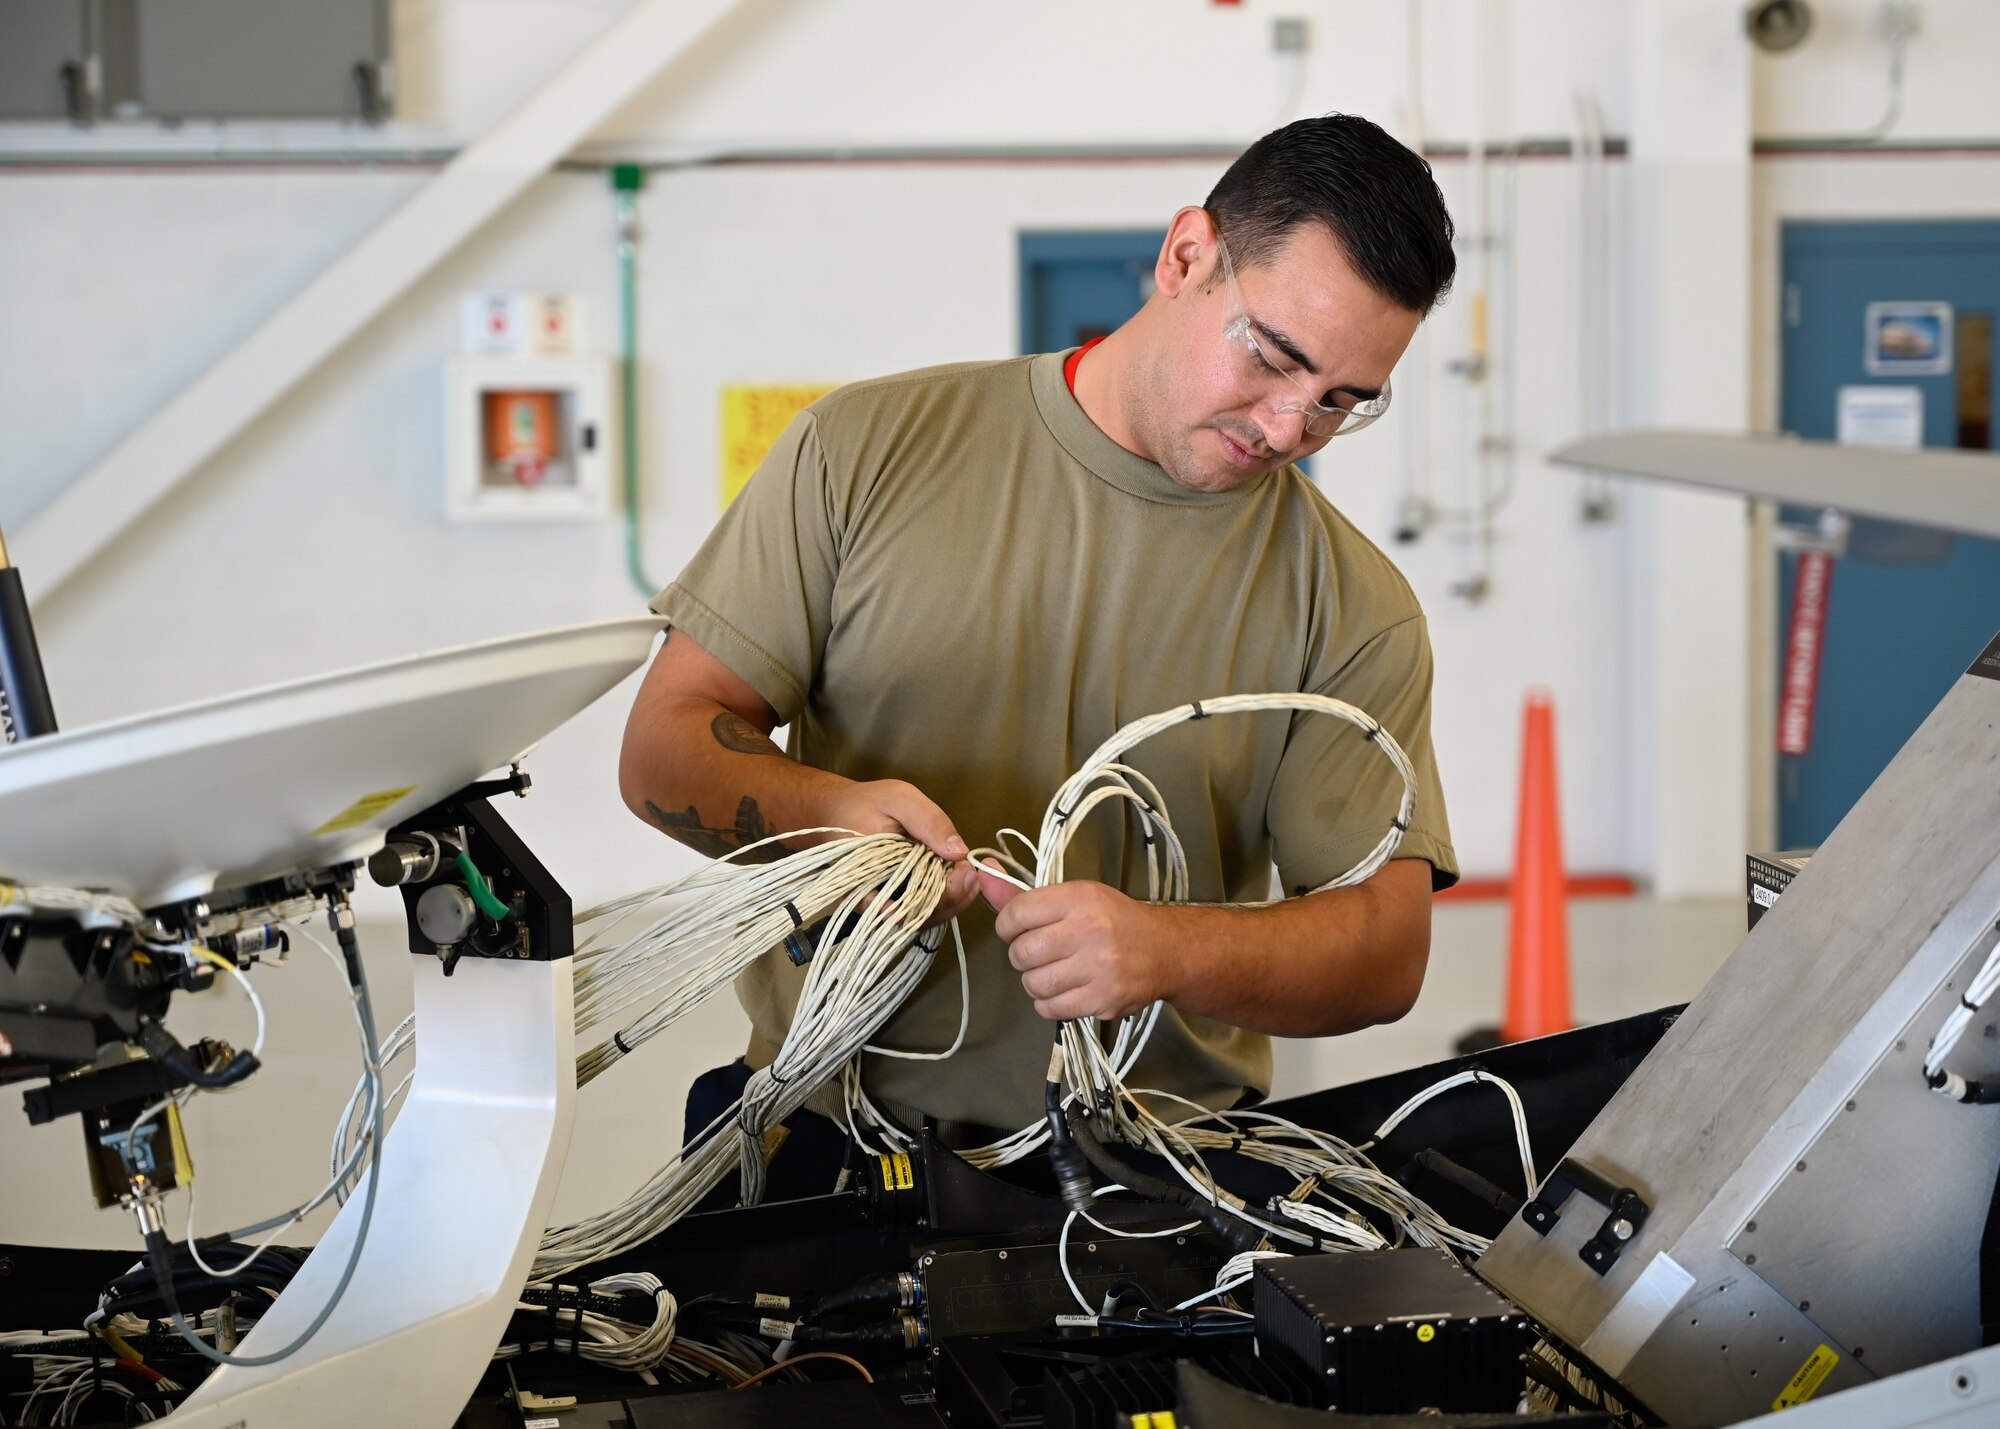 Staff Sgt. Paul Robledo Garcia, a 214 LRE Avionics Technician here, is one of the first Air National Guard and Air Force maintainers to completely dis- and reassemble the MQ-9 Reaper.